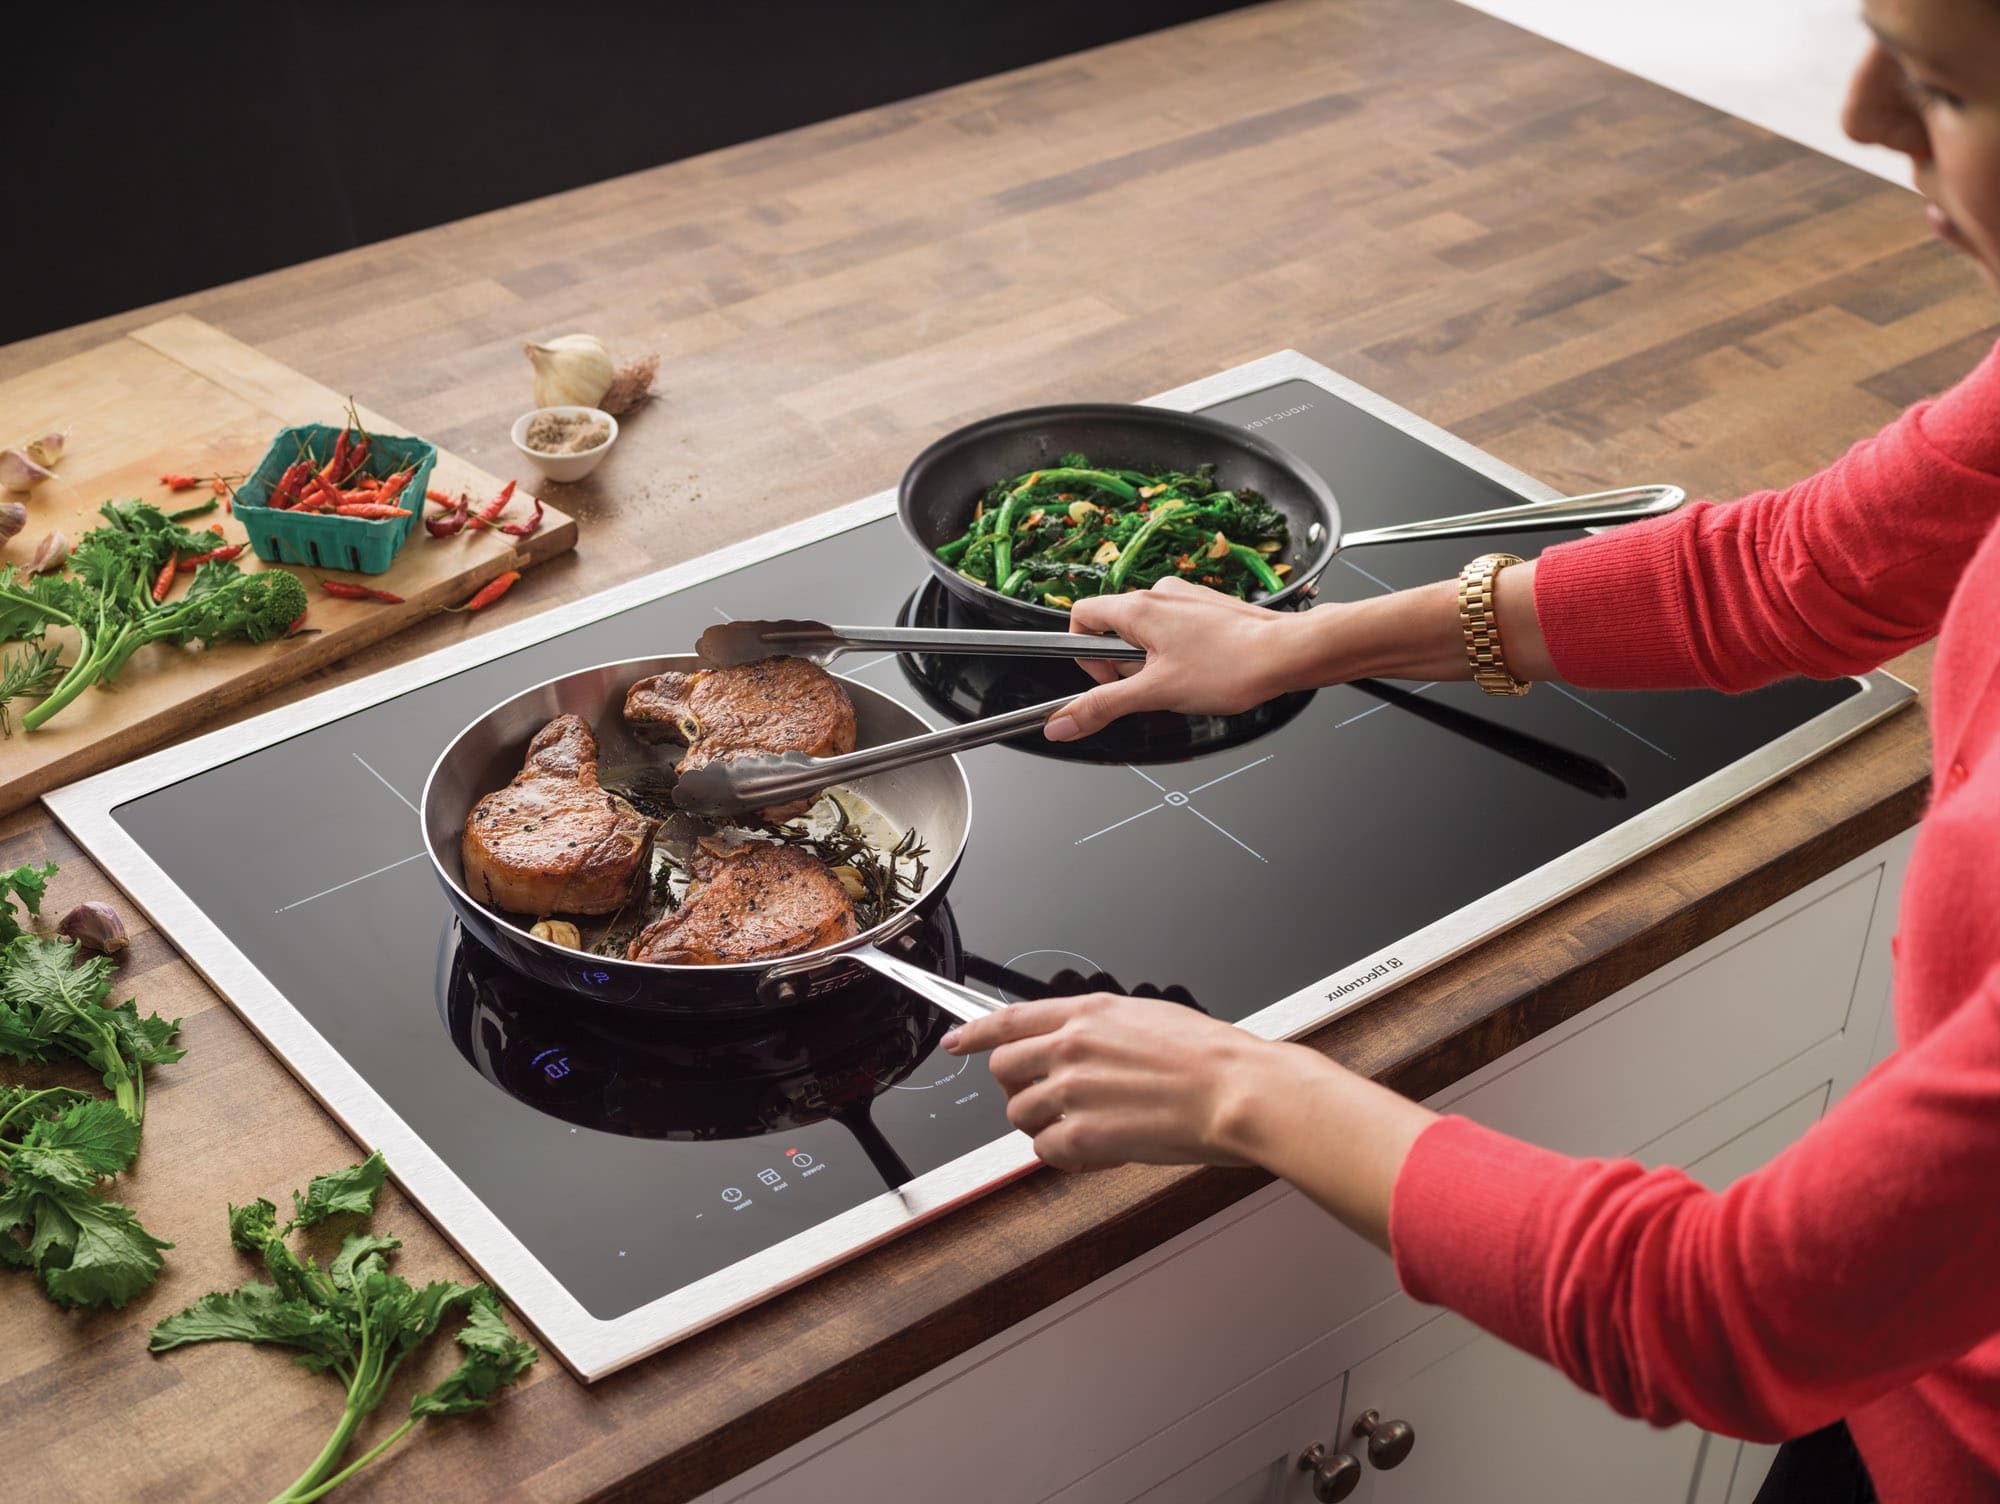 Lindsey cooking a delicious steak in her branded new induction cooktop.